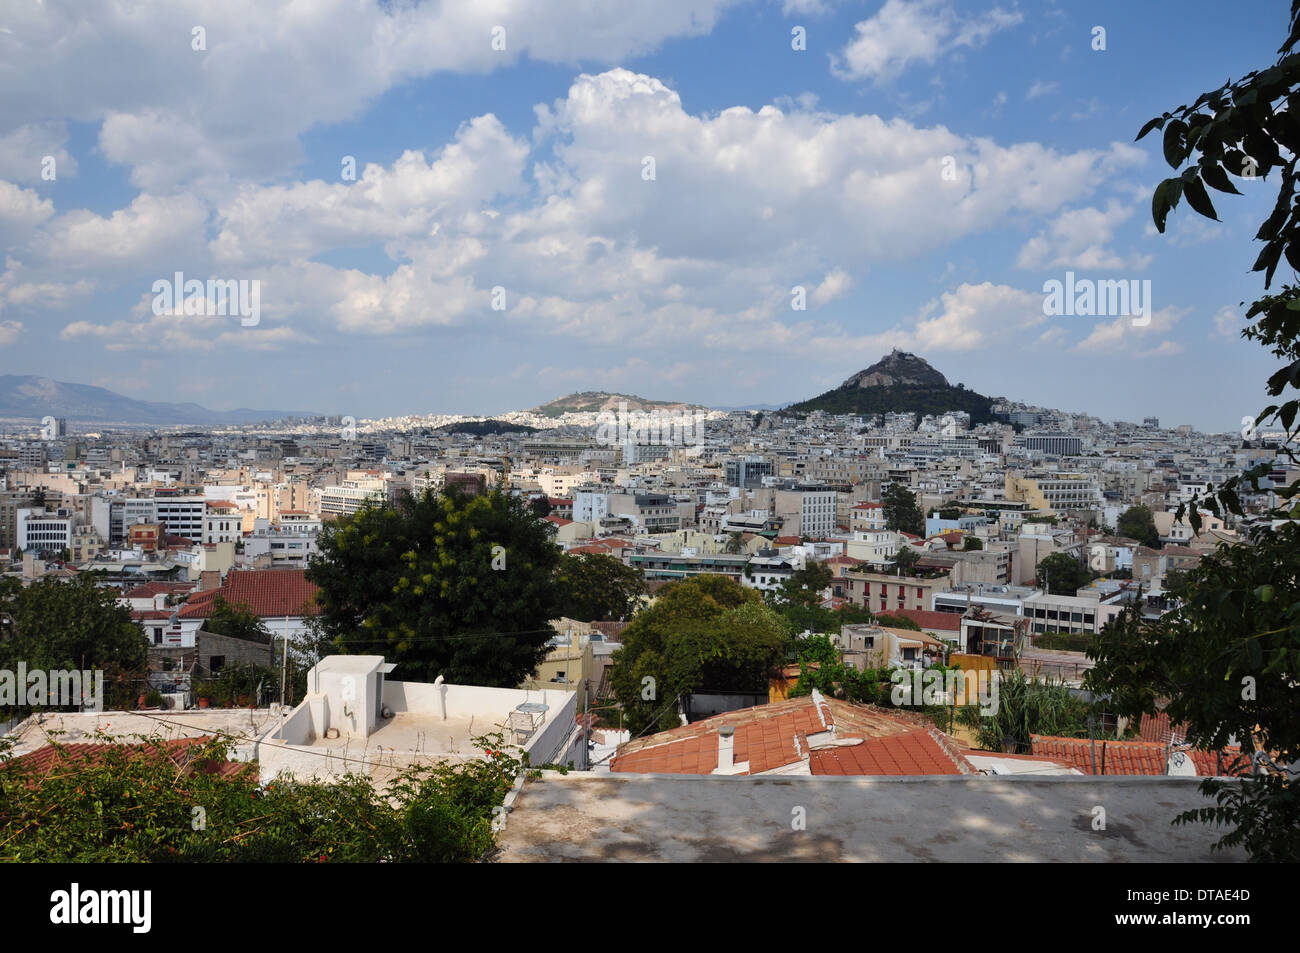 View of the city of Athens Greece and Lycabettus hill as seen from Plaka. Stock Photo